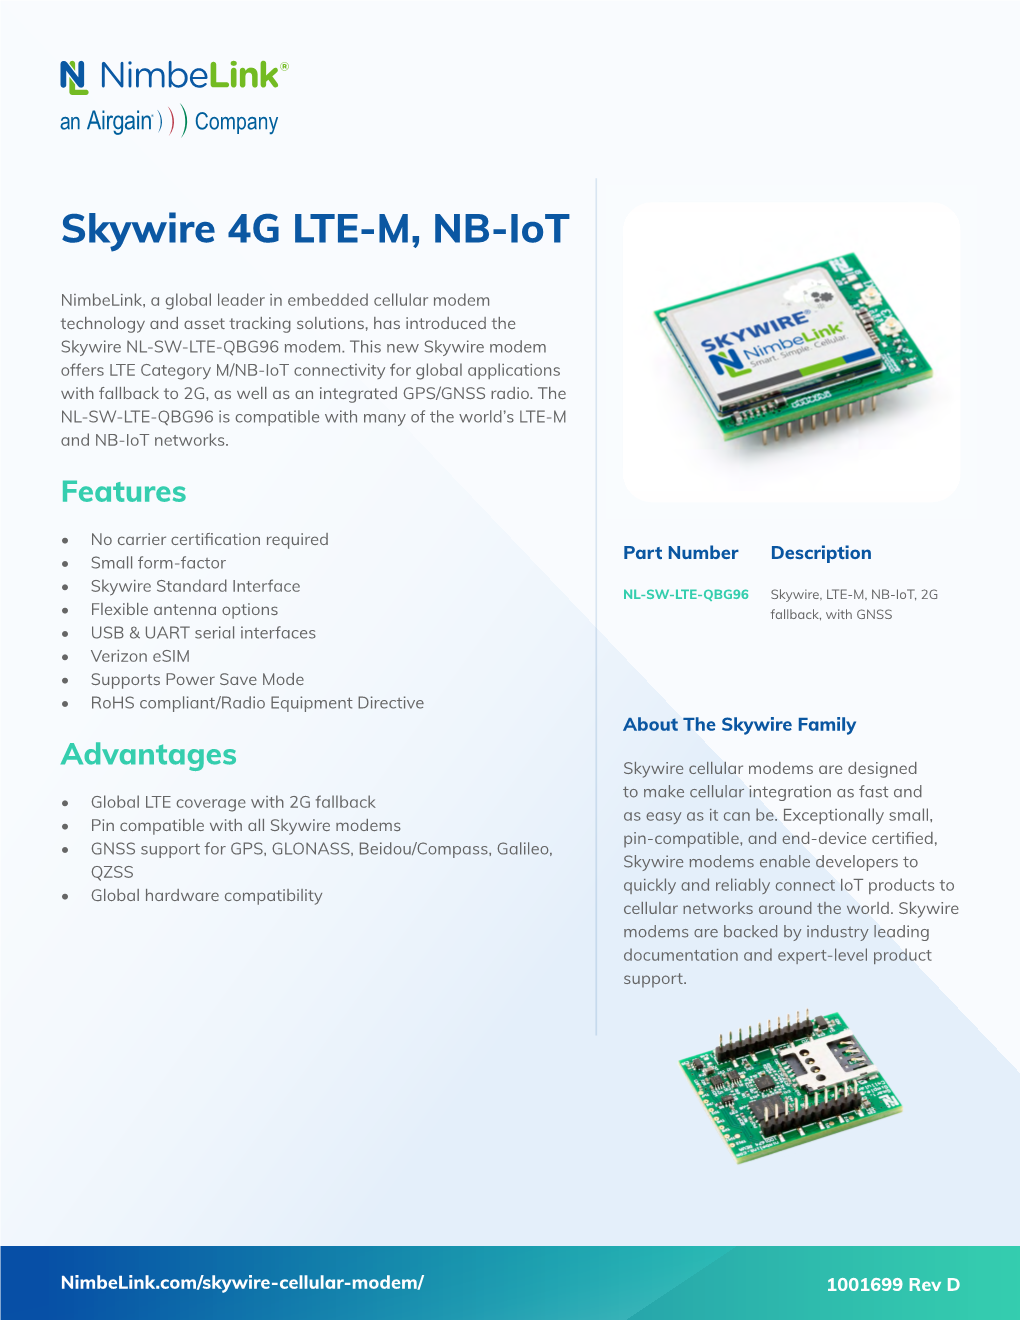 Skywire 4G LTE-M, NB-Iot